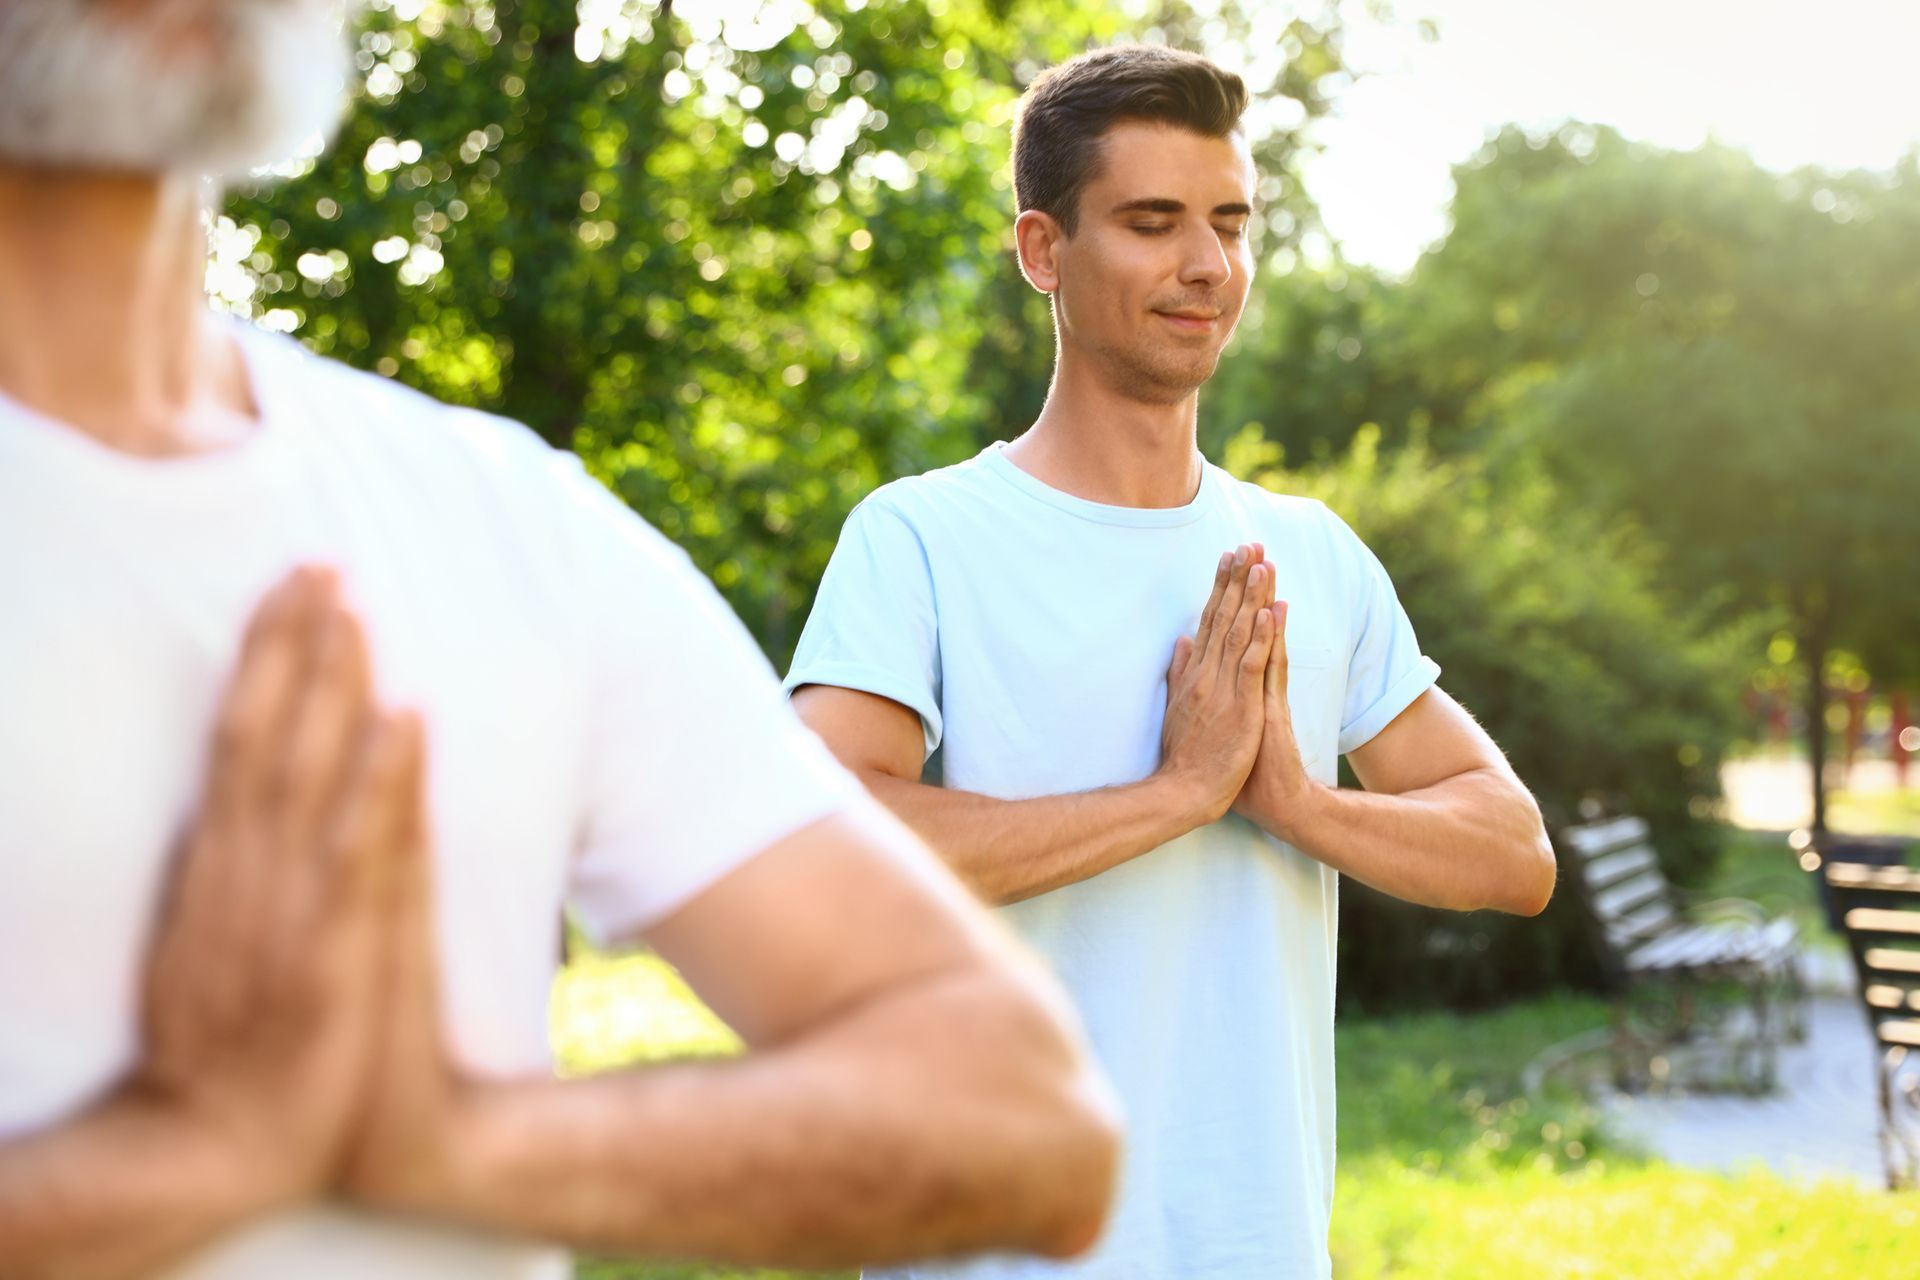  The man is practicing yoga in a park, to improve his overall heath and sperm quality